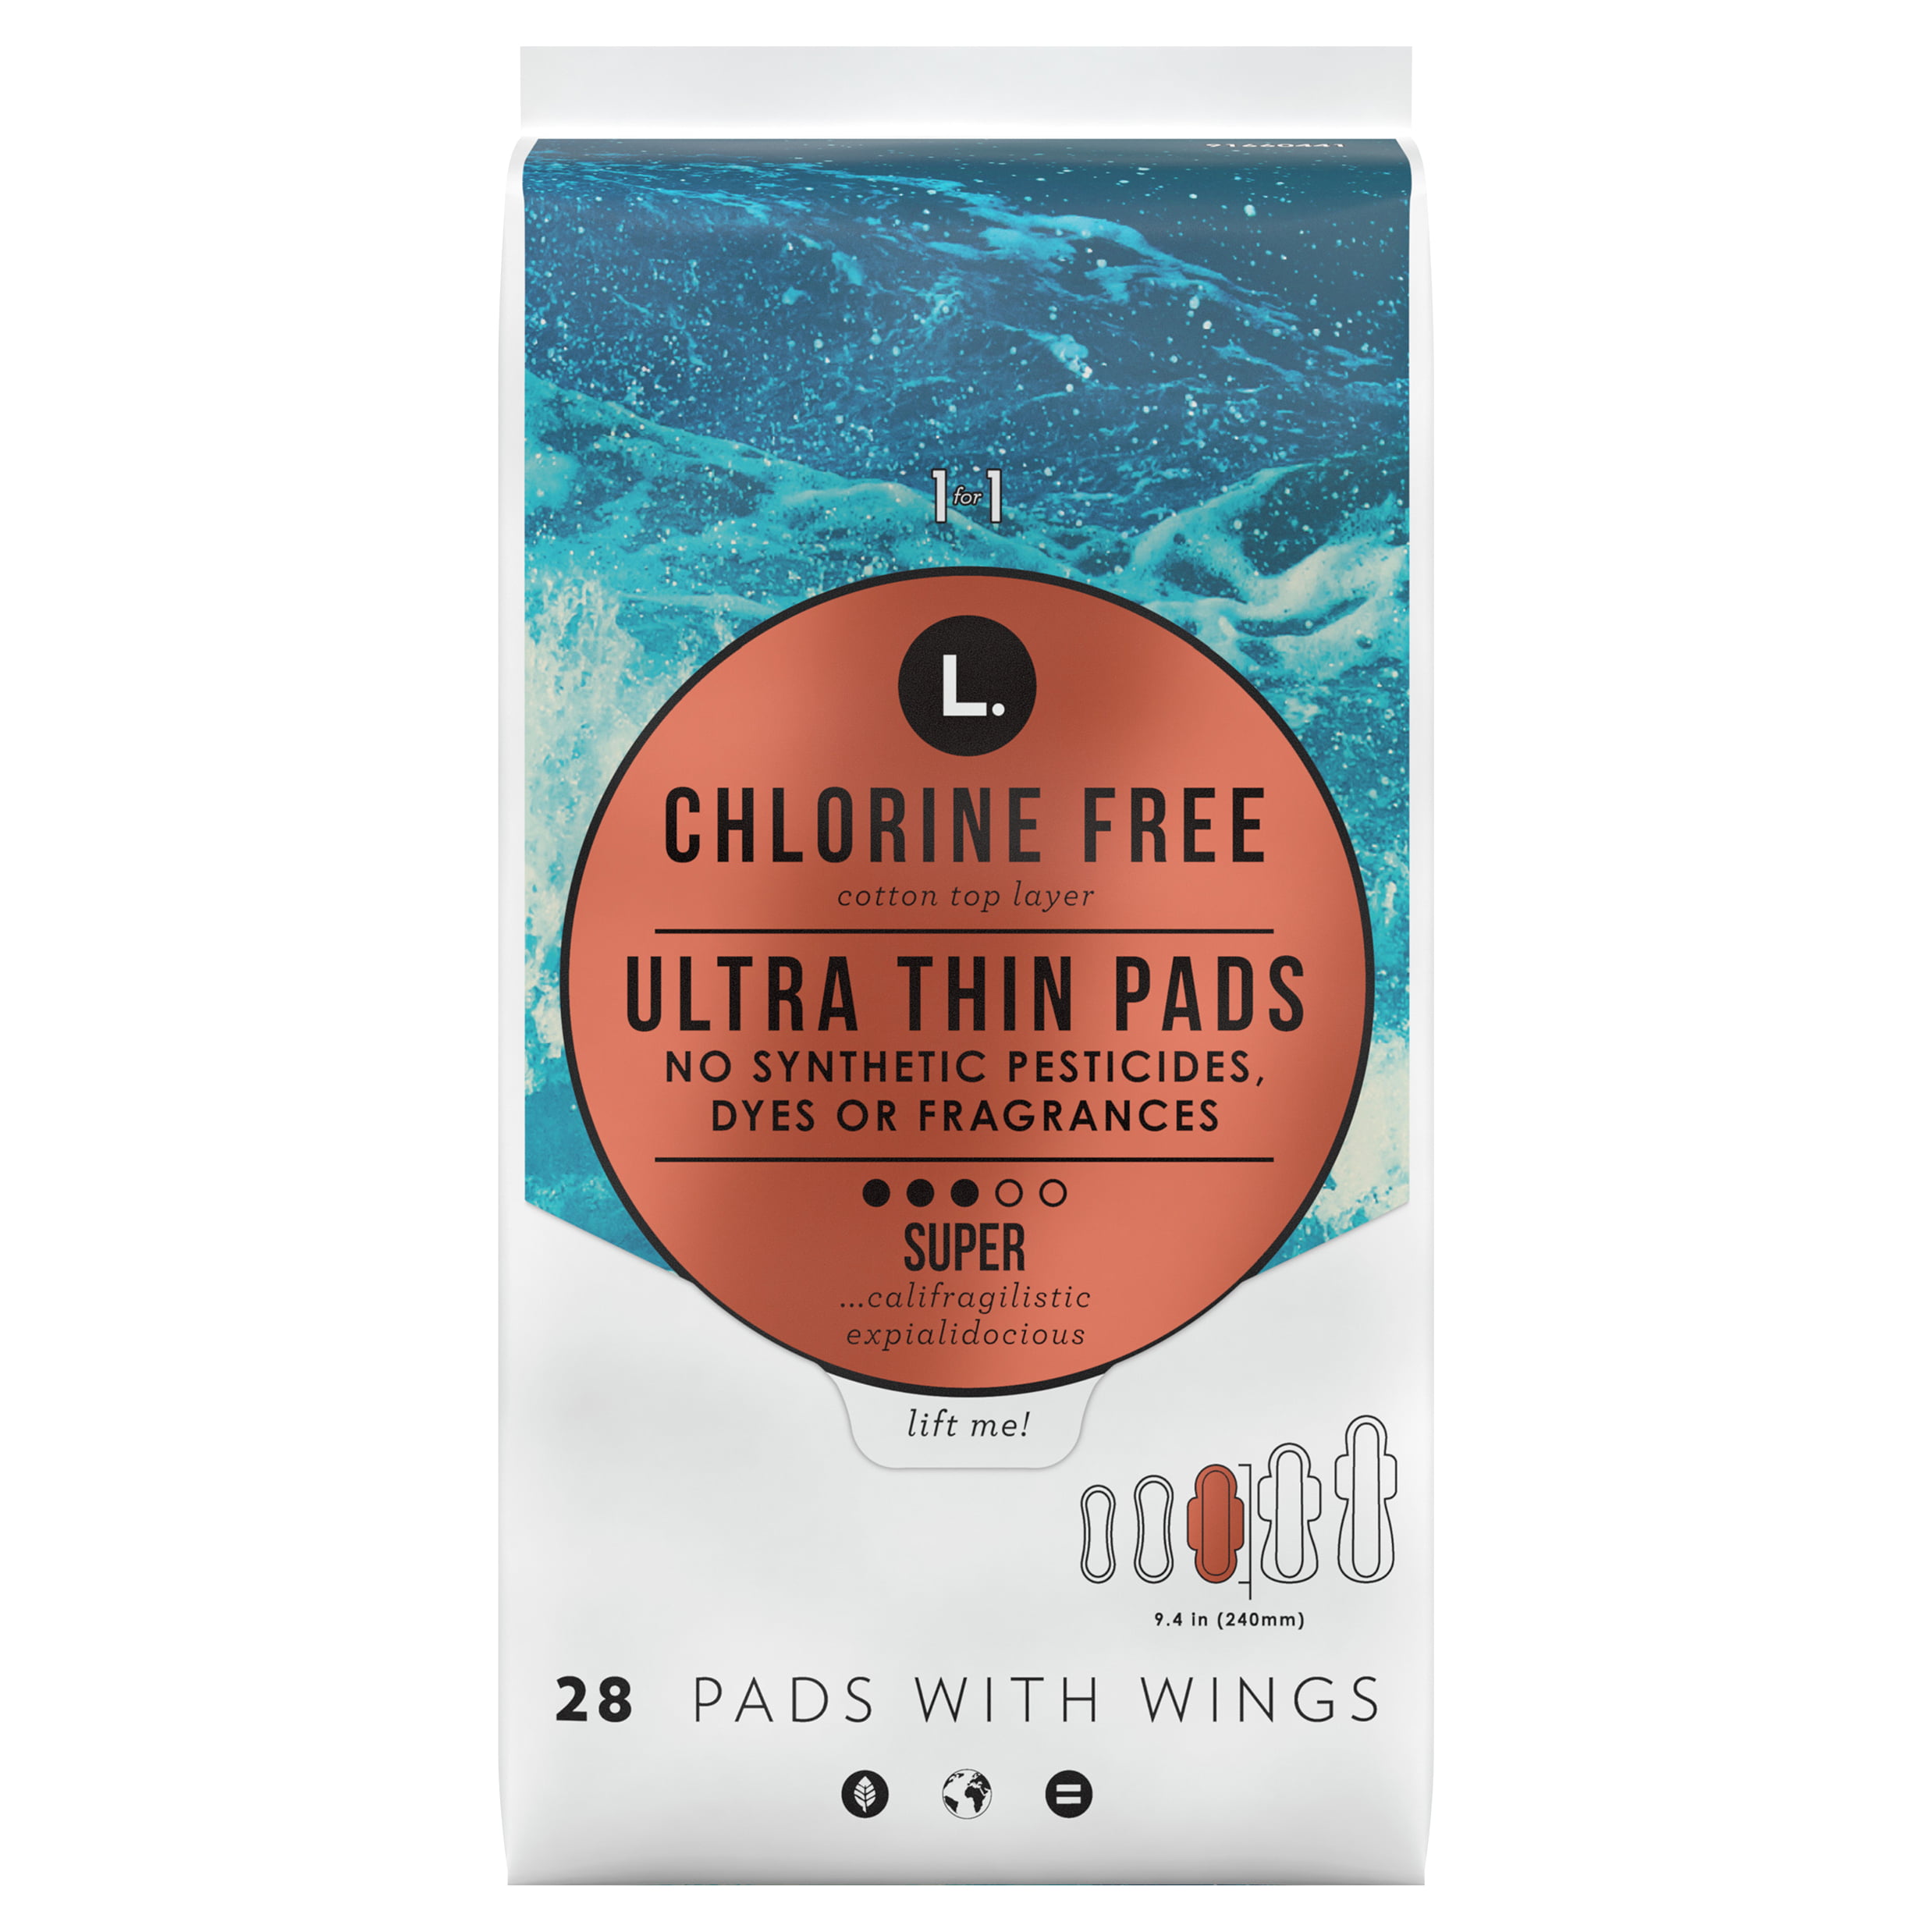 L . Pure Cotton Chlorine Free Top Layer Ultra Thin Super With Wings  Unscented Absorbency Pads - 56ct : Target